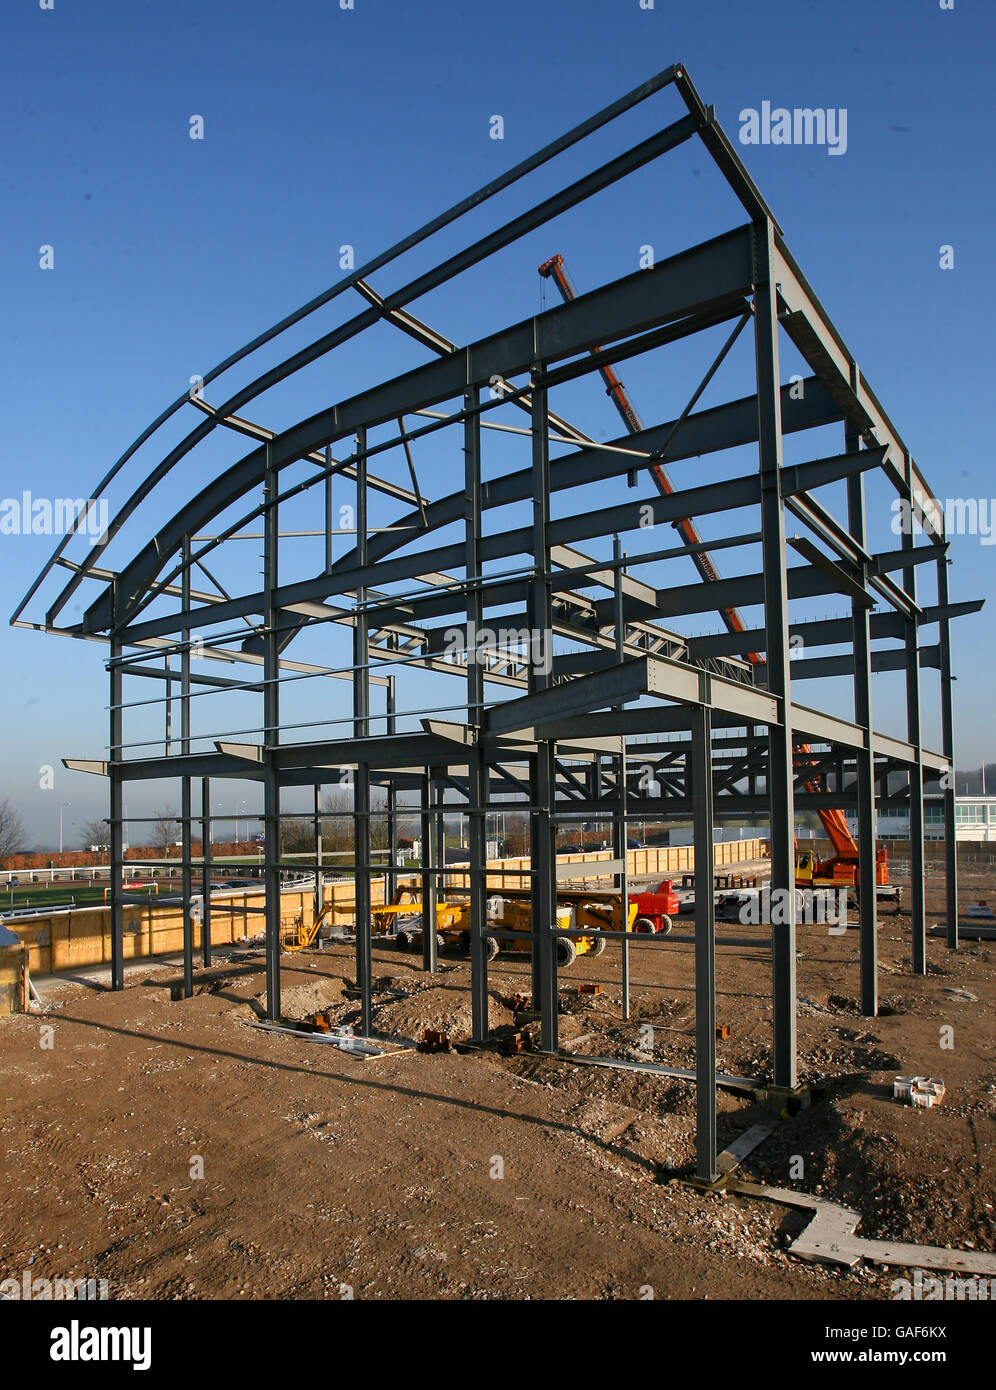 Redevelopment of the Grandstand at Epsom Downs Racecourse Stock Photo